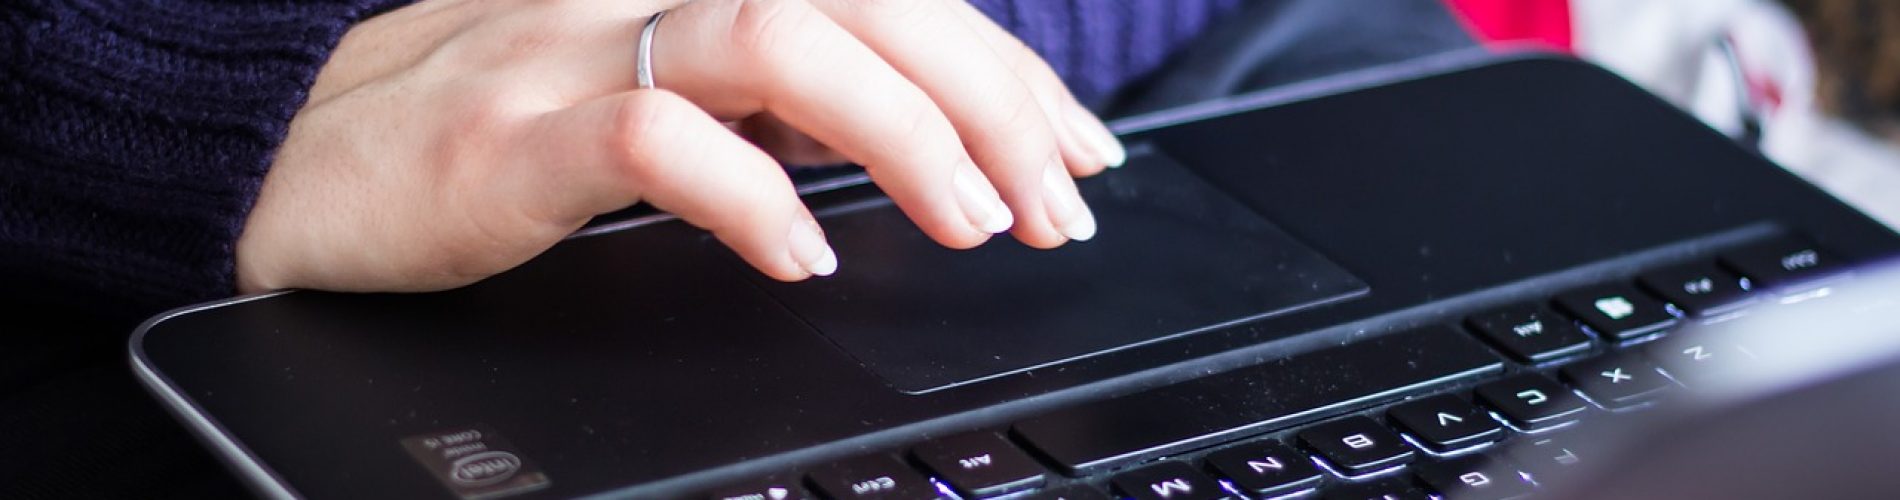 a woman with with blue jumper and rings on her hand typing on a black laptop